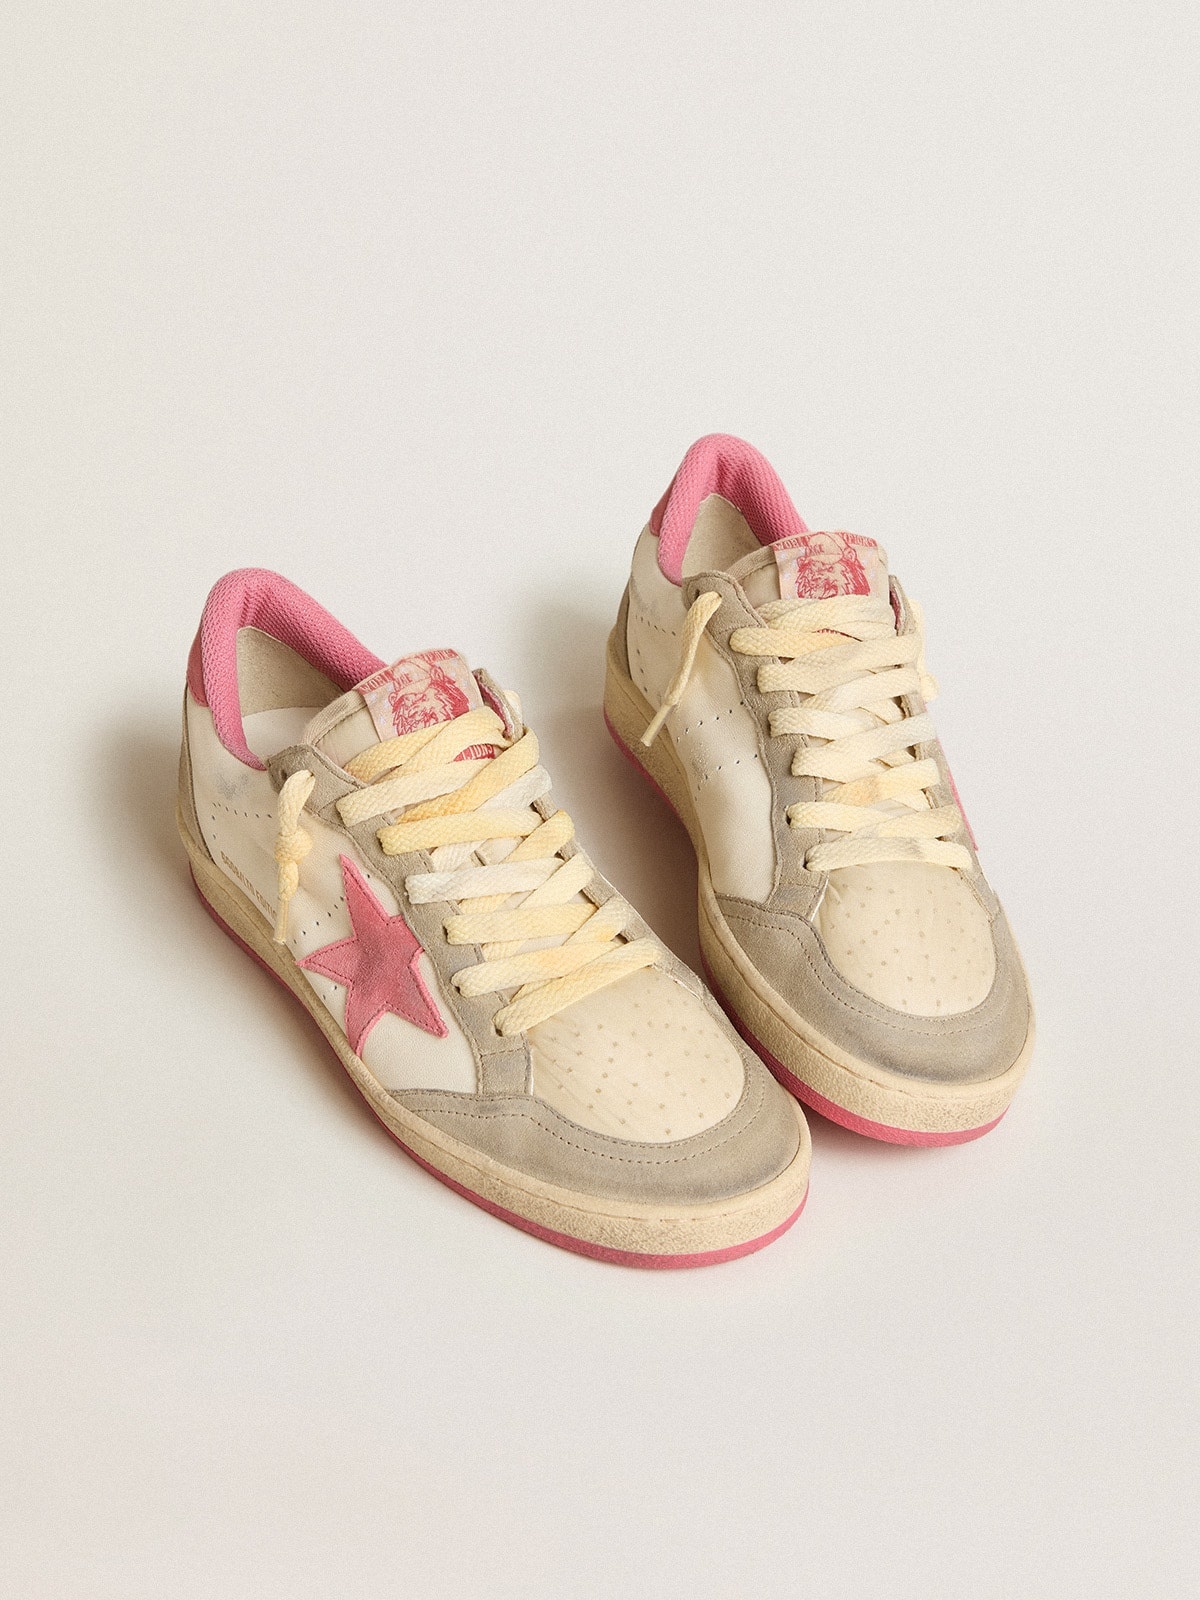 Ball Star LTD in nappa with pink suede star and dove-gray inserts - 2